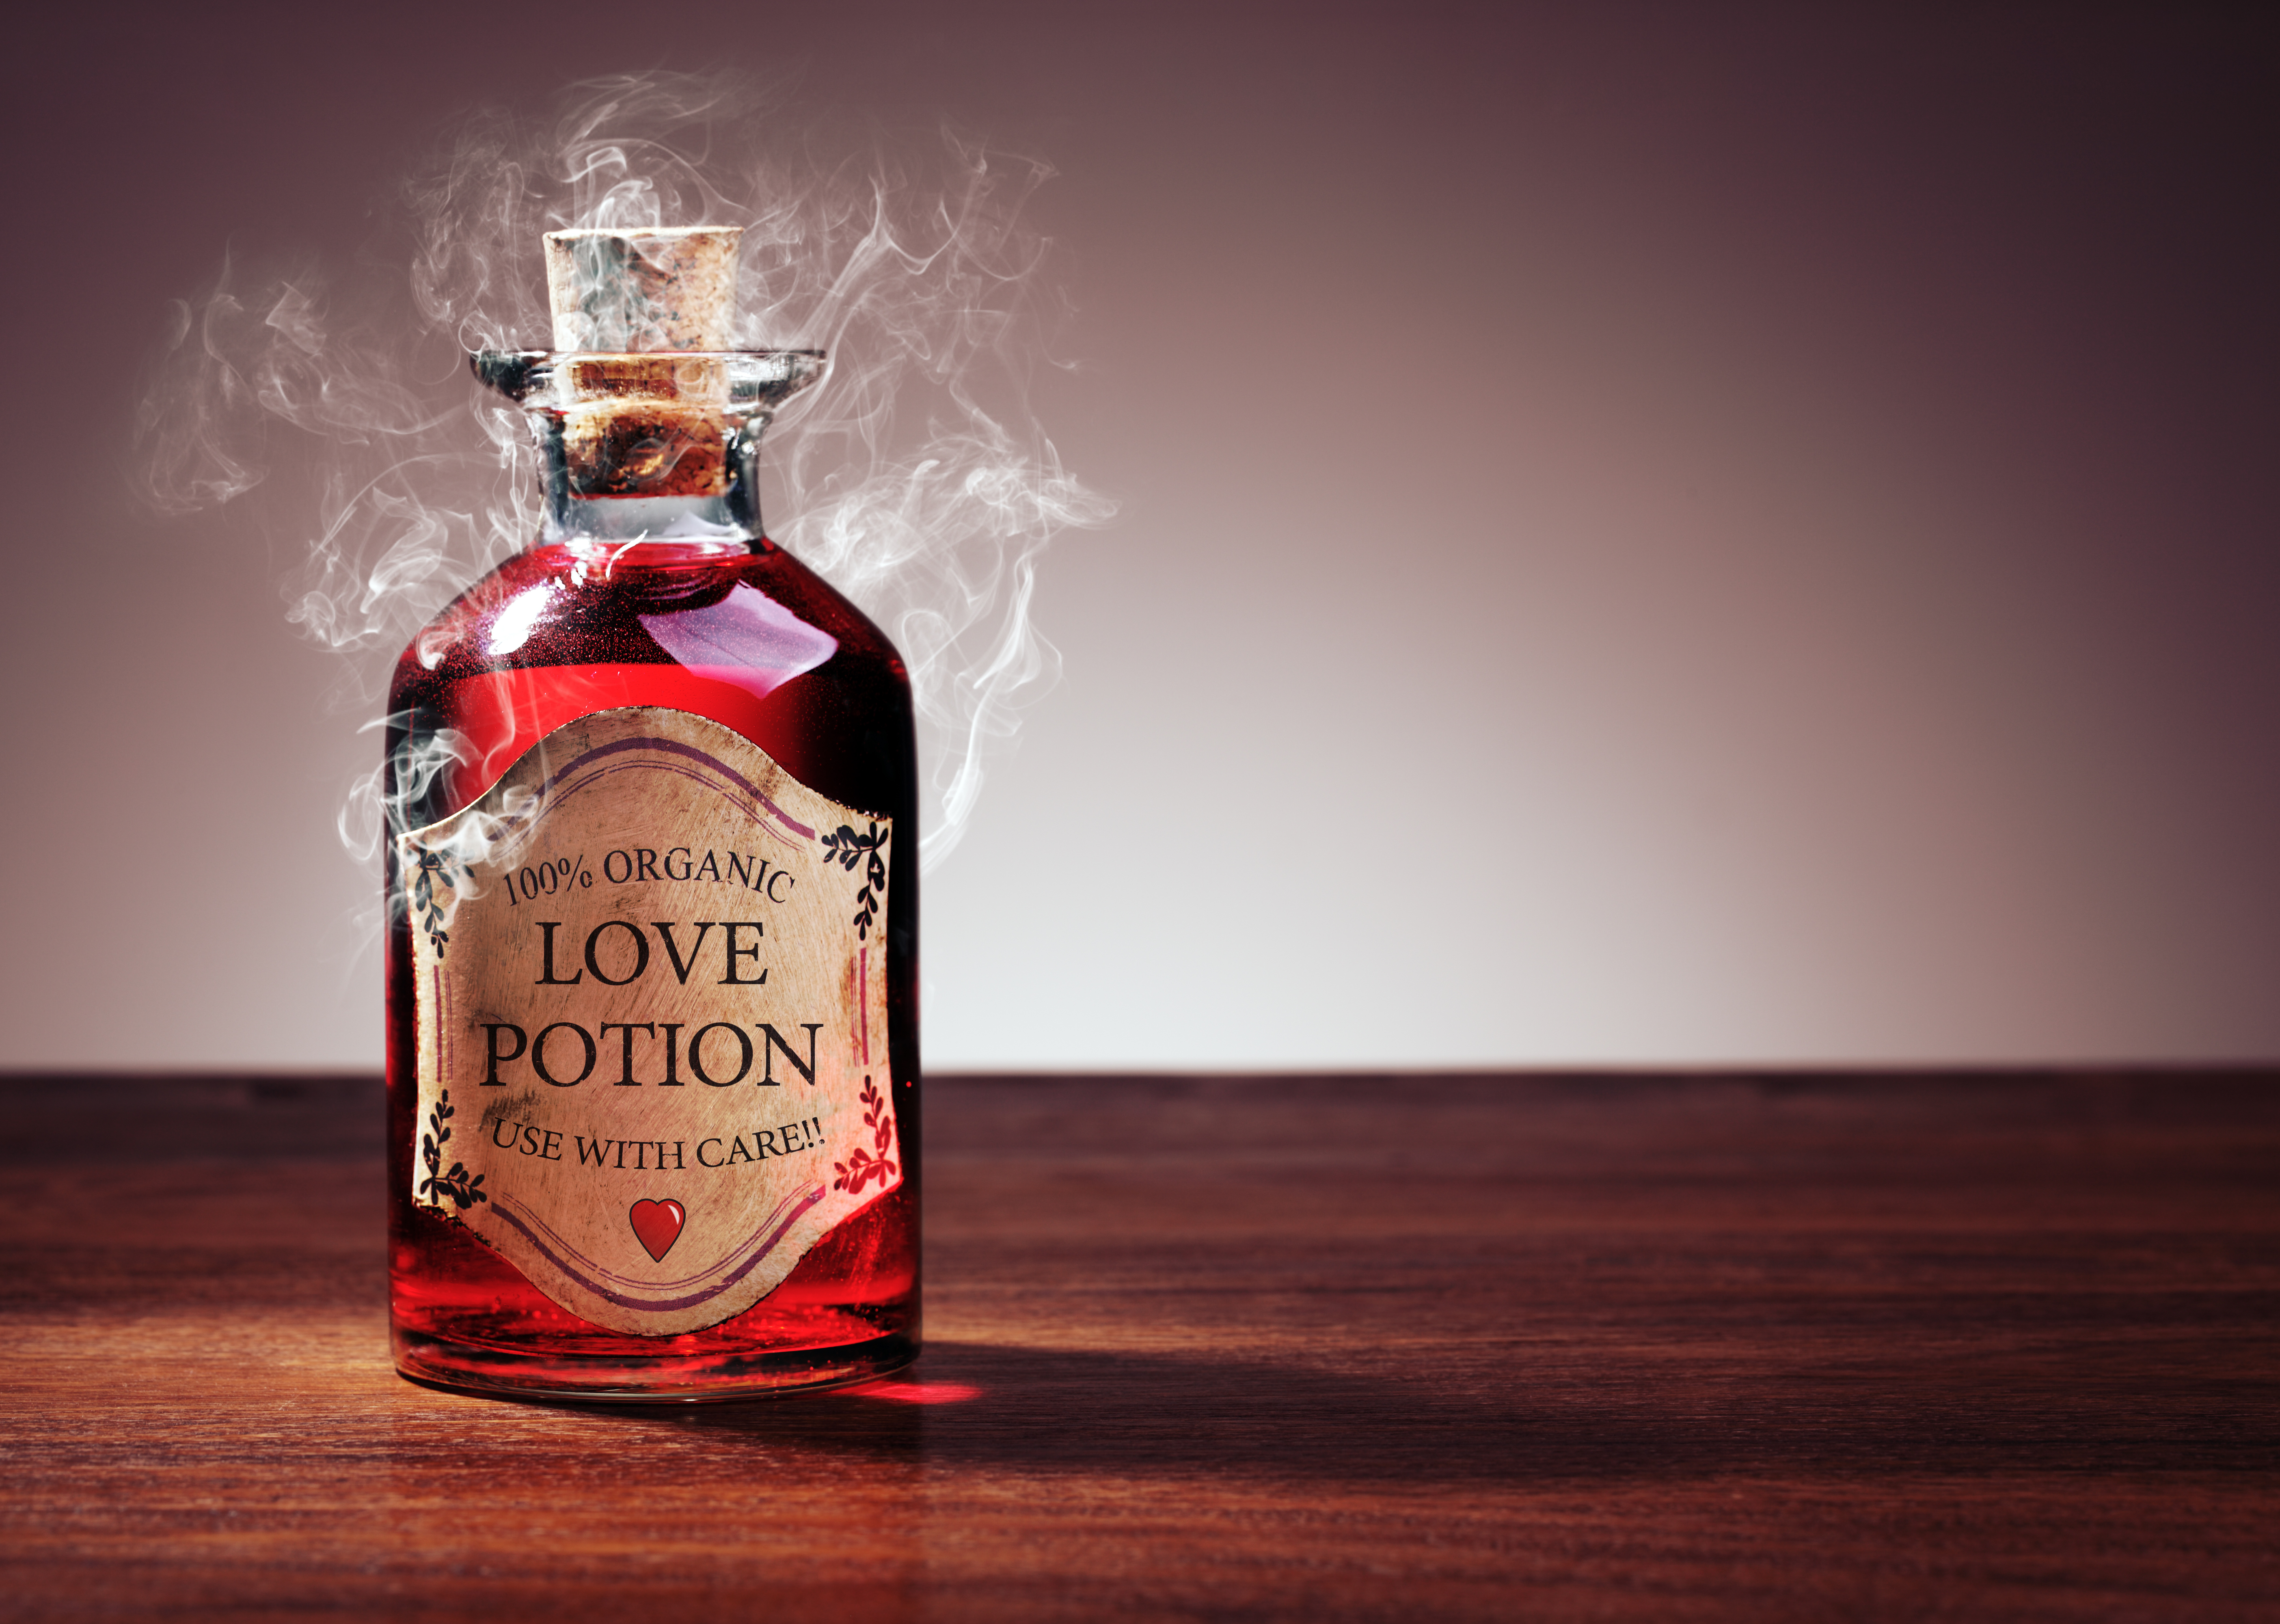 An image of a red liquid in a bottle with love potion written on the label